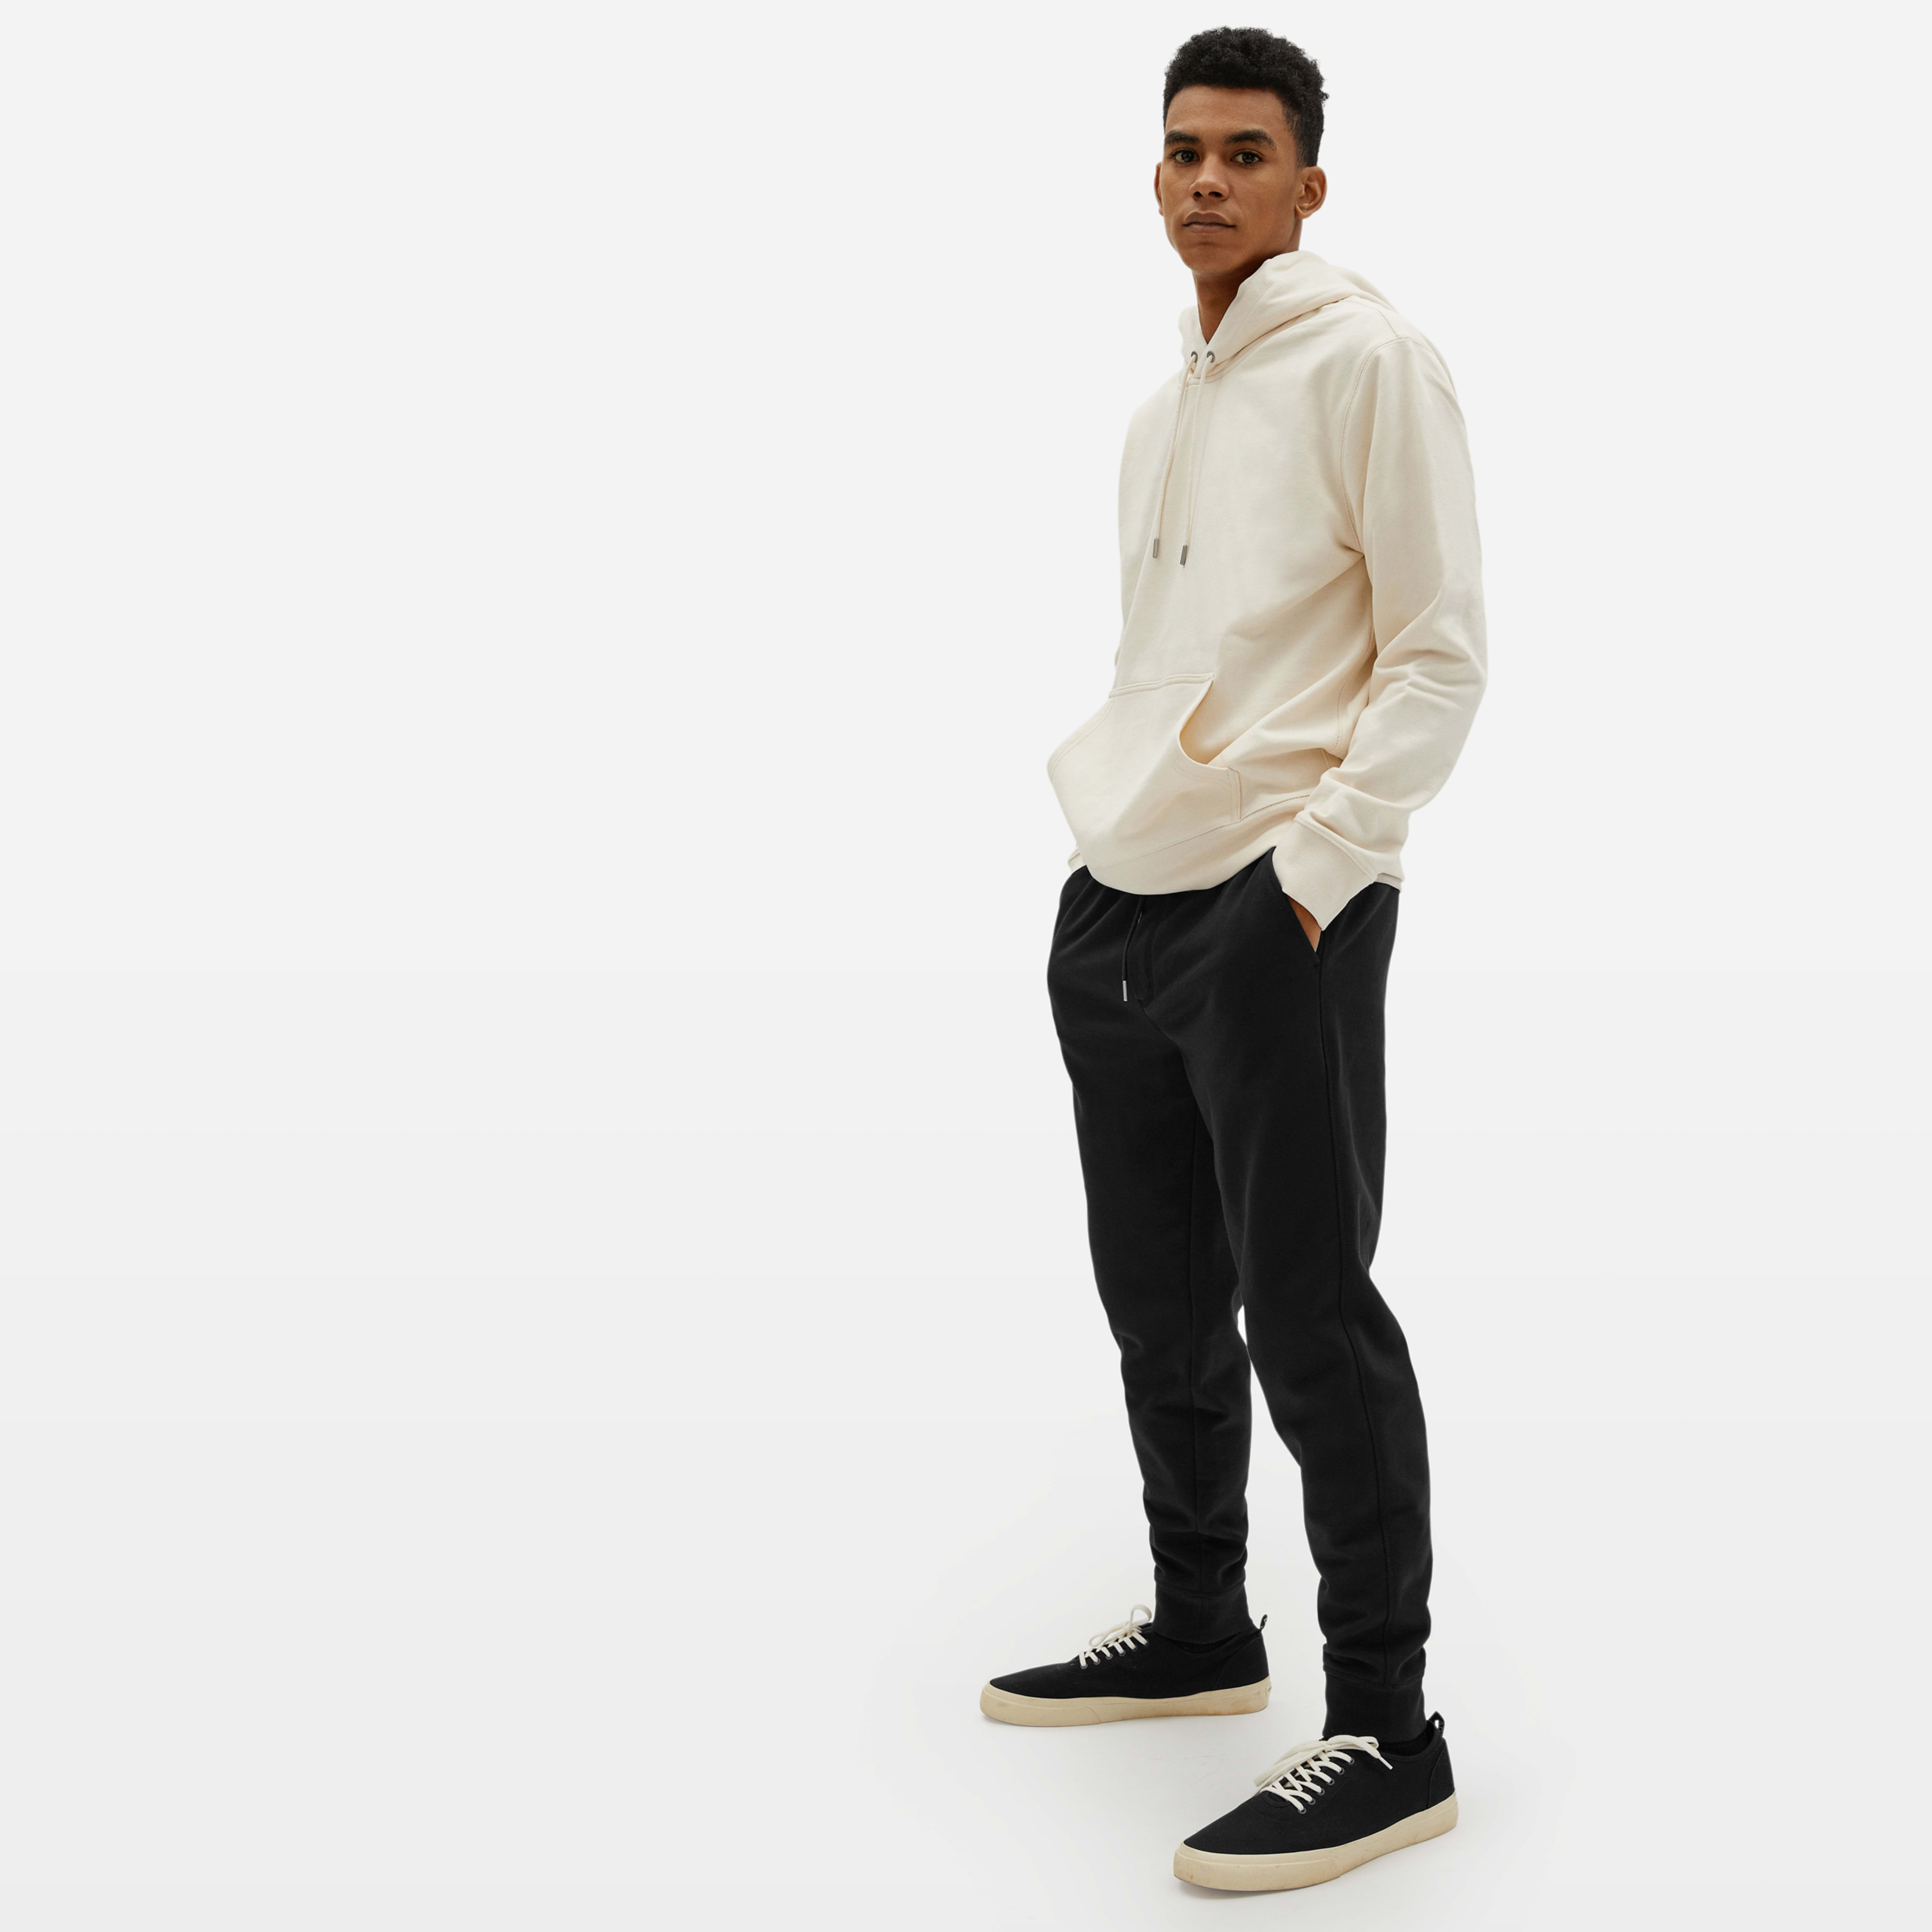 Men's French Terry Sweatpant | Uniform by Everlane in Black, Size XS